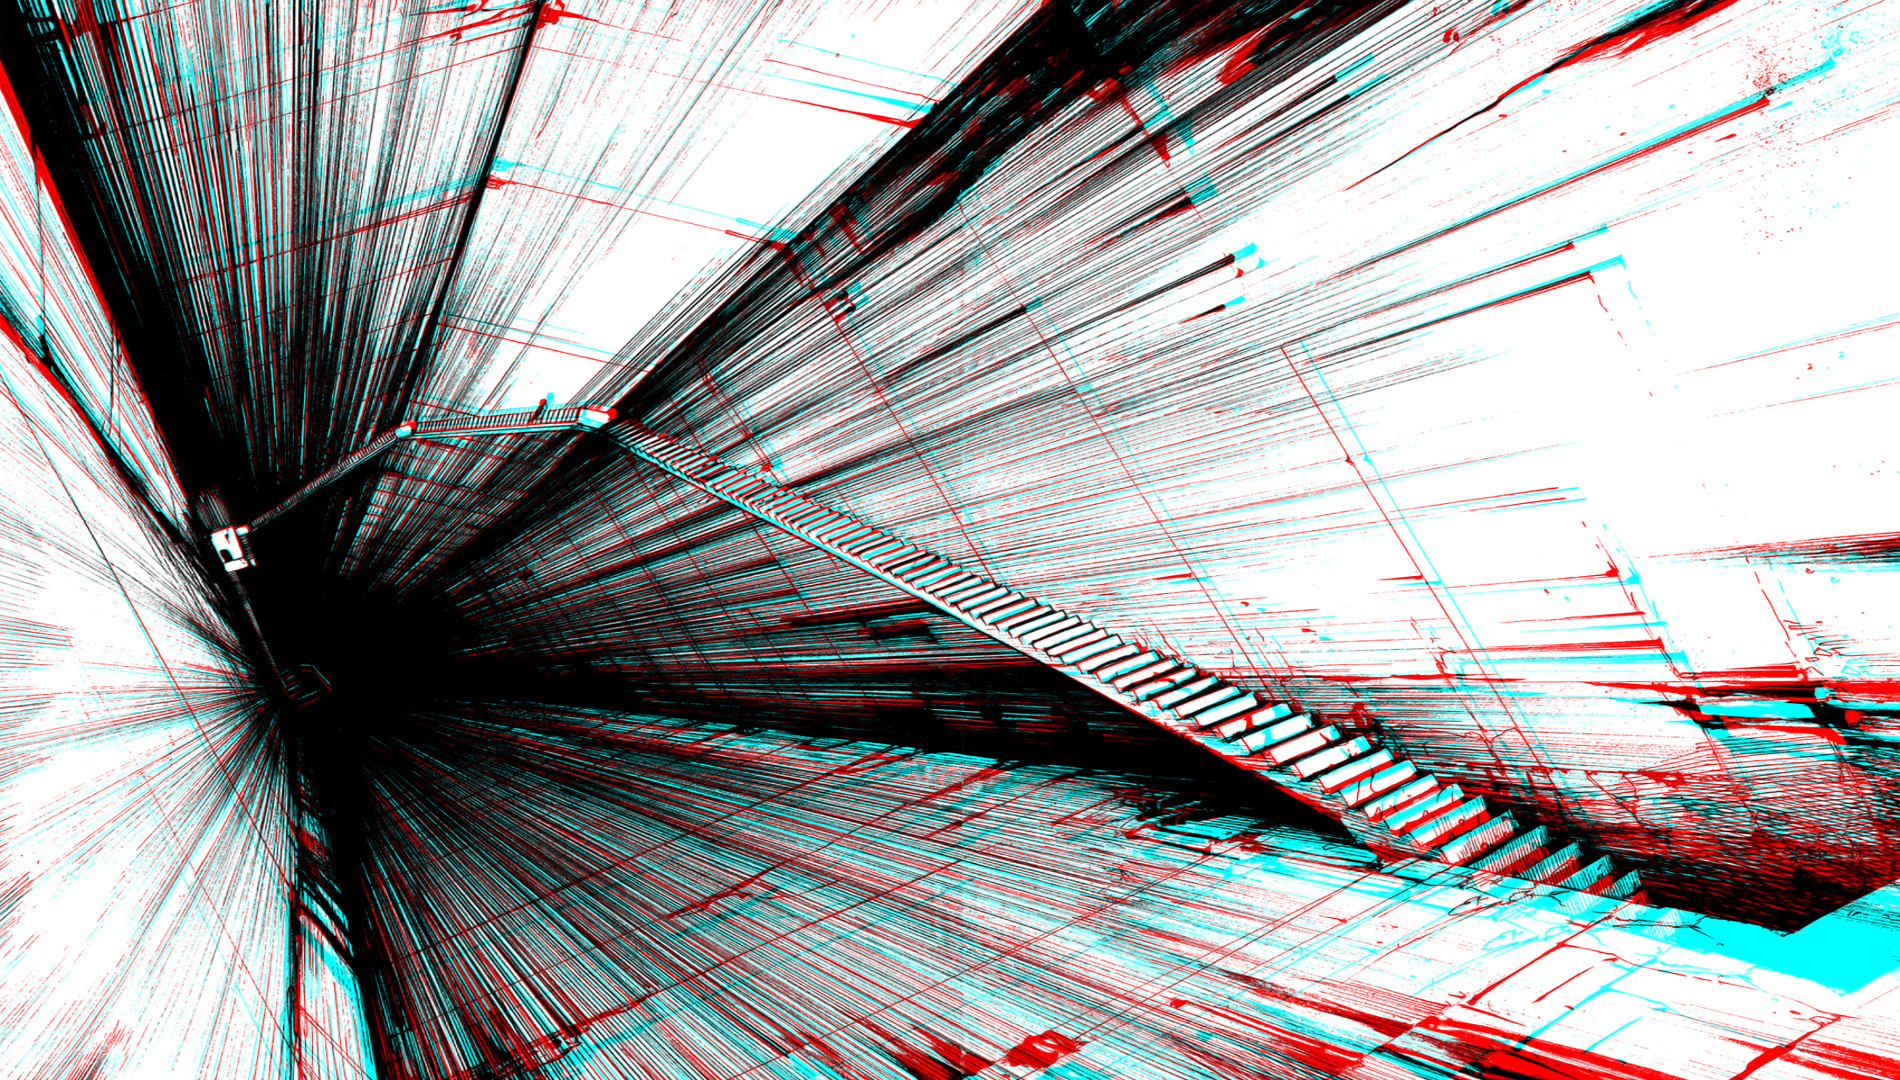 General 1900x1080 anaglyph 3D stairs hallway artwork surreal abstract